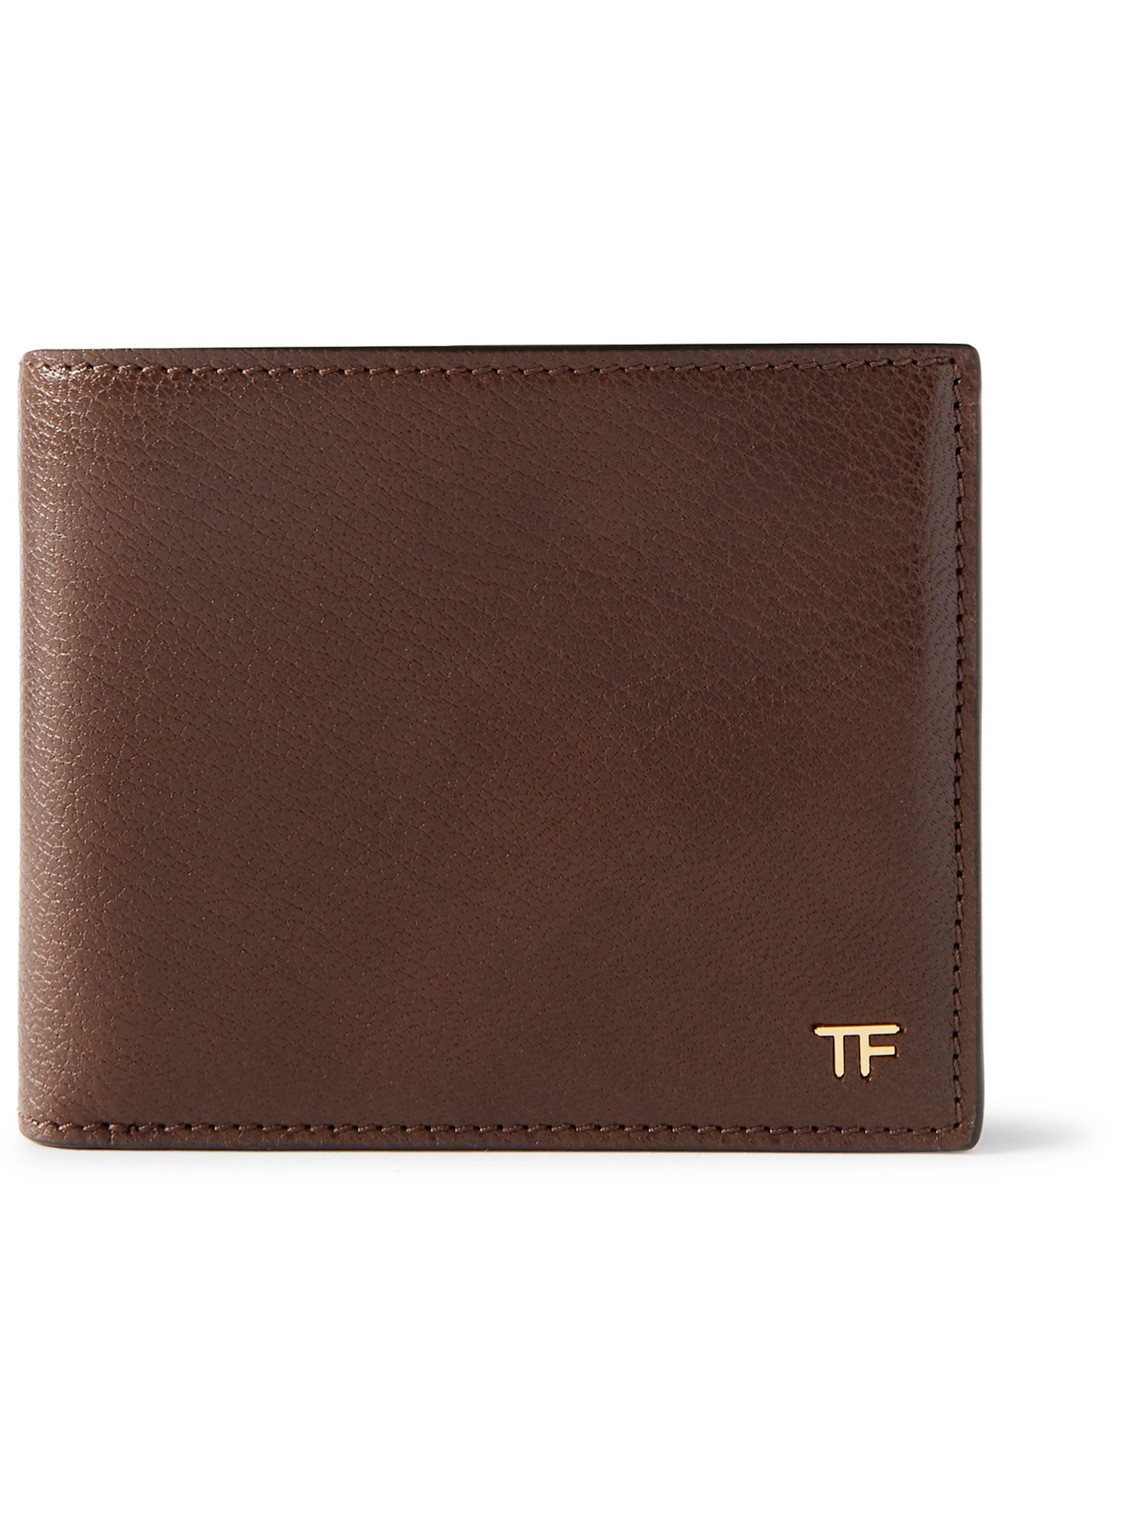 Tom Ford Leather Billfold Wallet In Brown